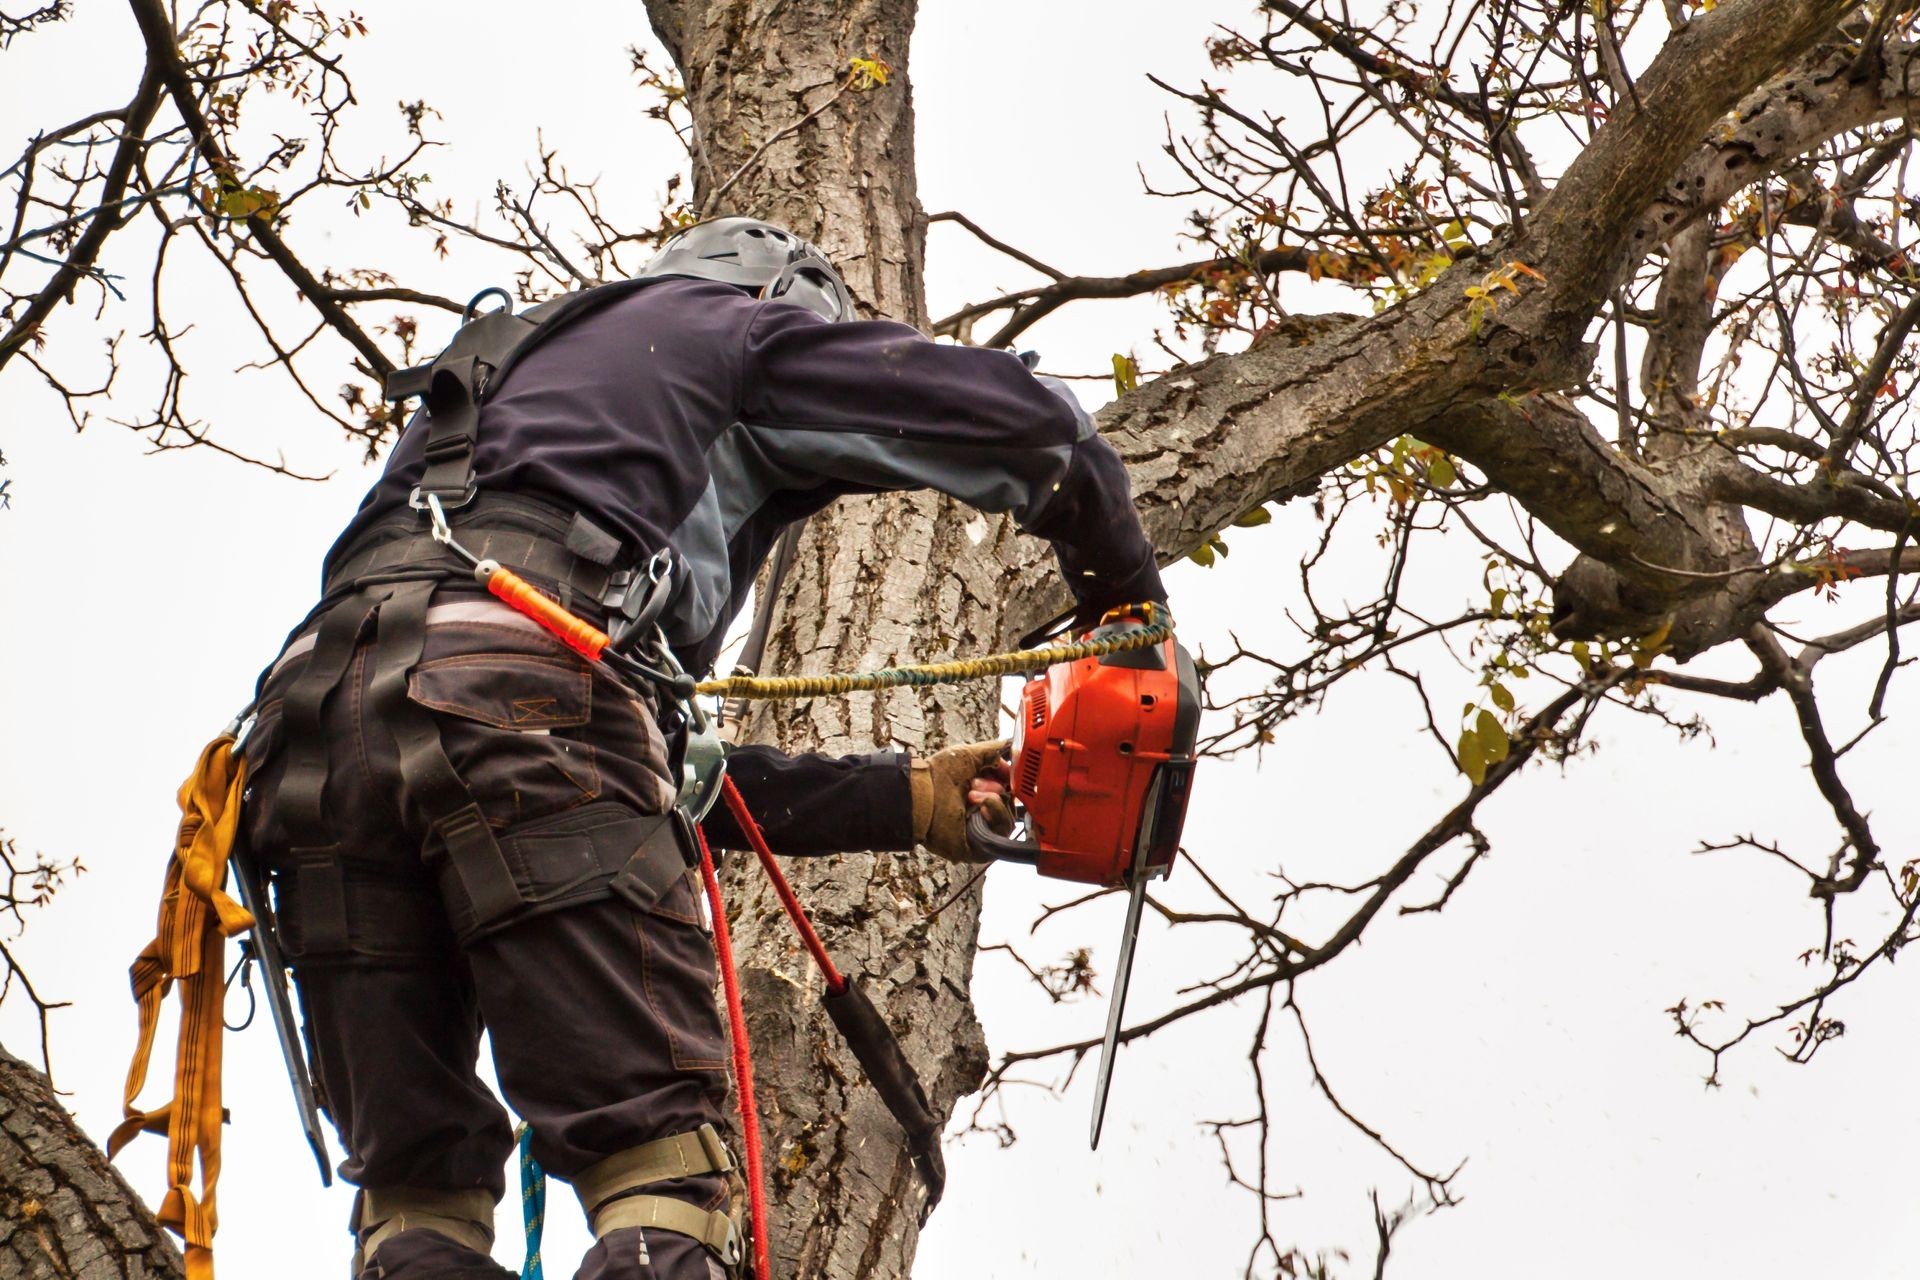 Lumberjack with saw and harness pruning a tree. Arborist work on old walnut tree